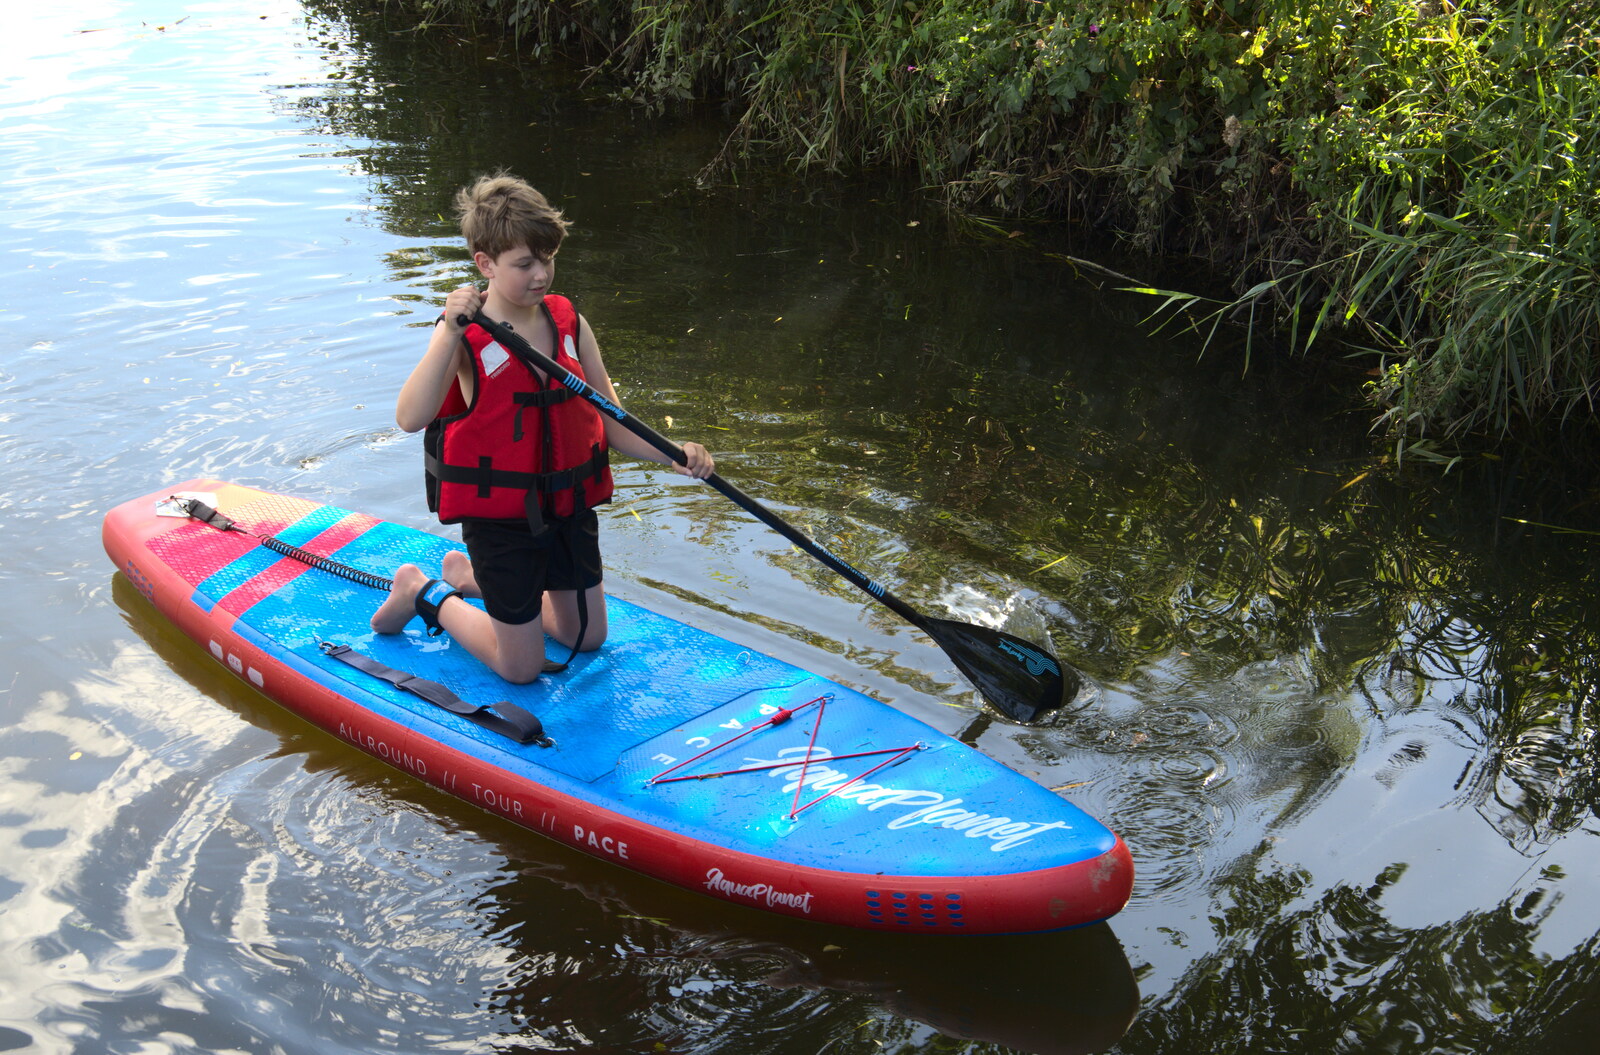 Camping at Three Rivers, Geldeston, Norfolk - 5th September 2020: Fred has a go